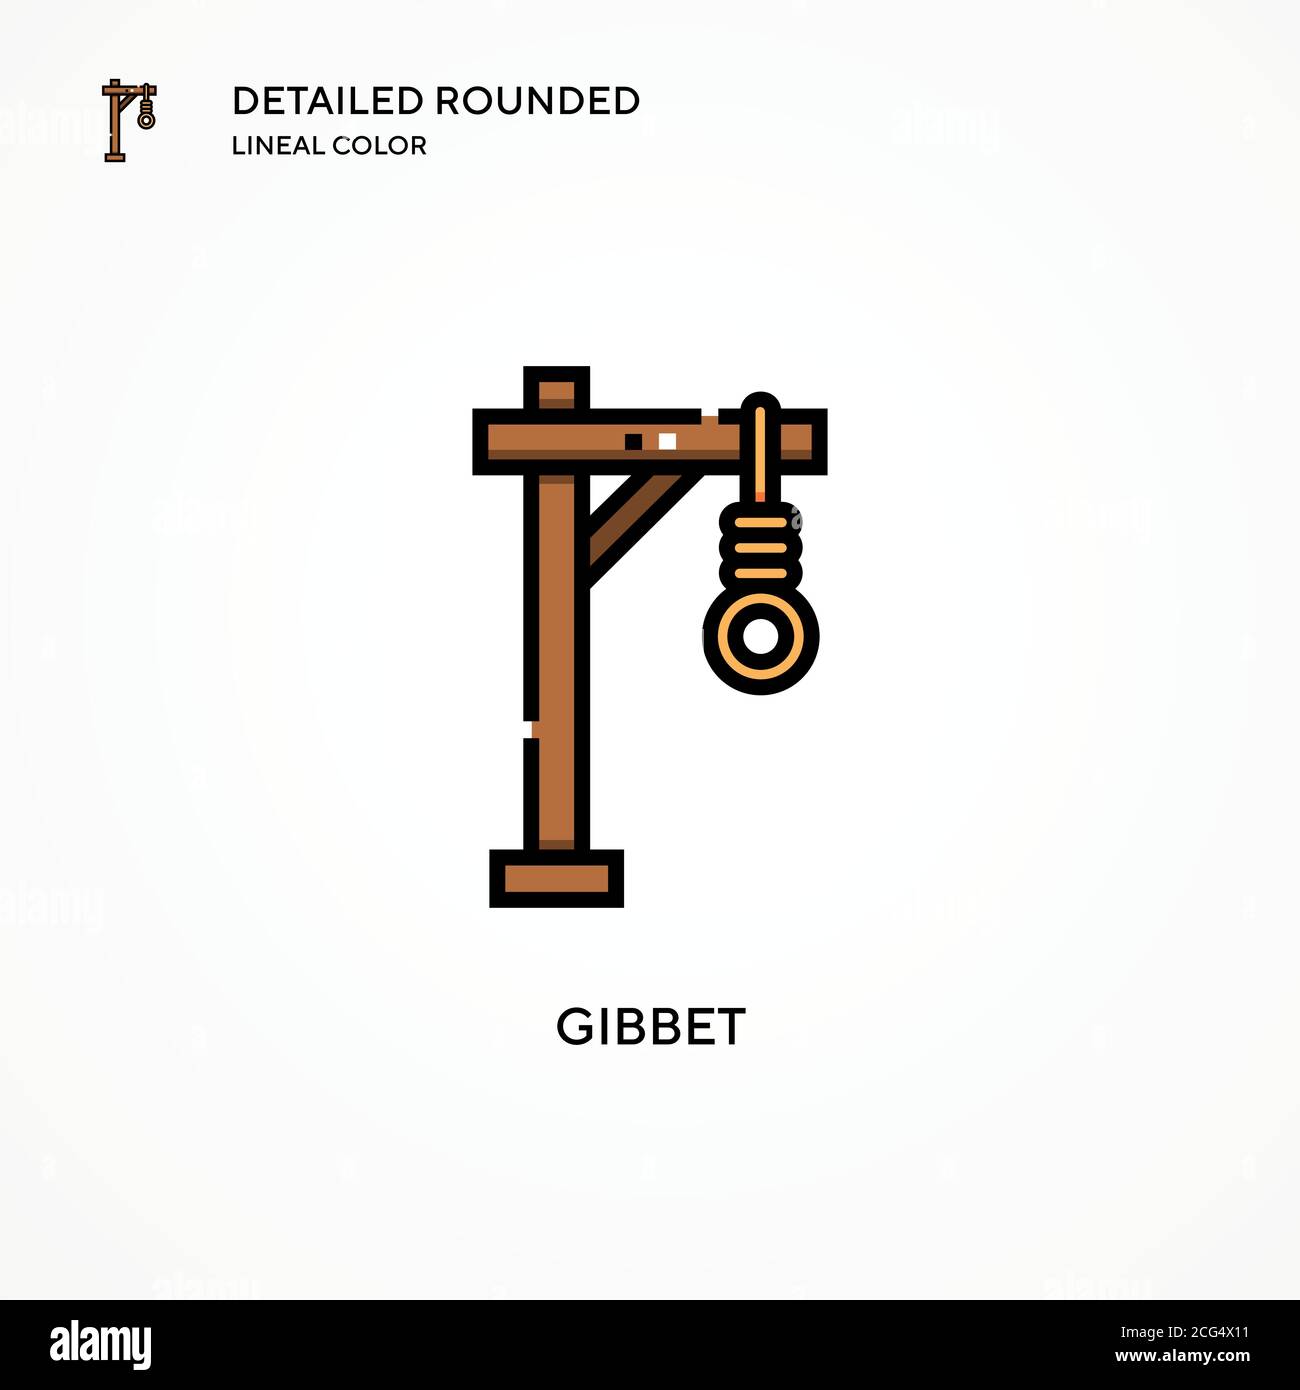 Gibbet vector icon. Modern vector illustration concepts. Easy to edit and customize. Stock Vector